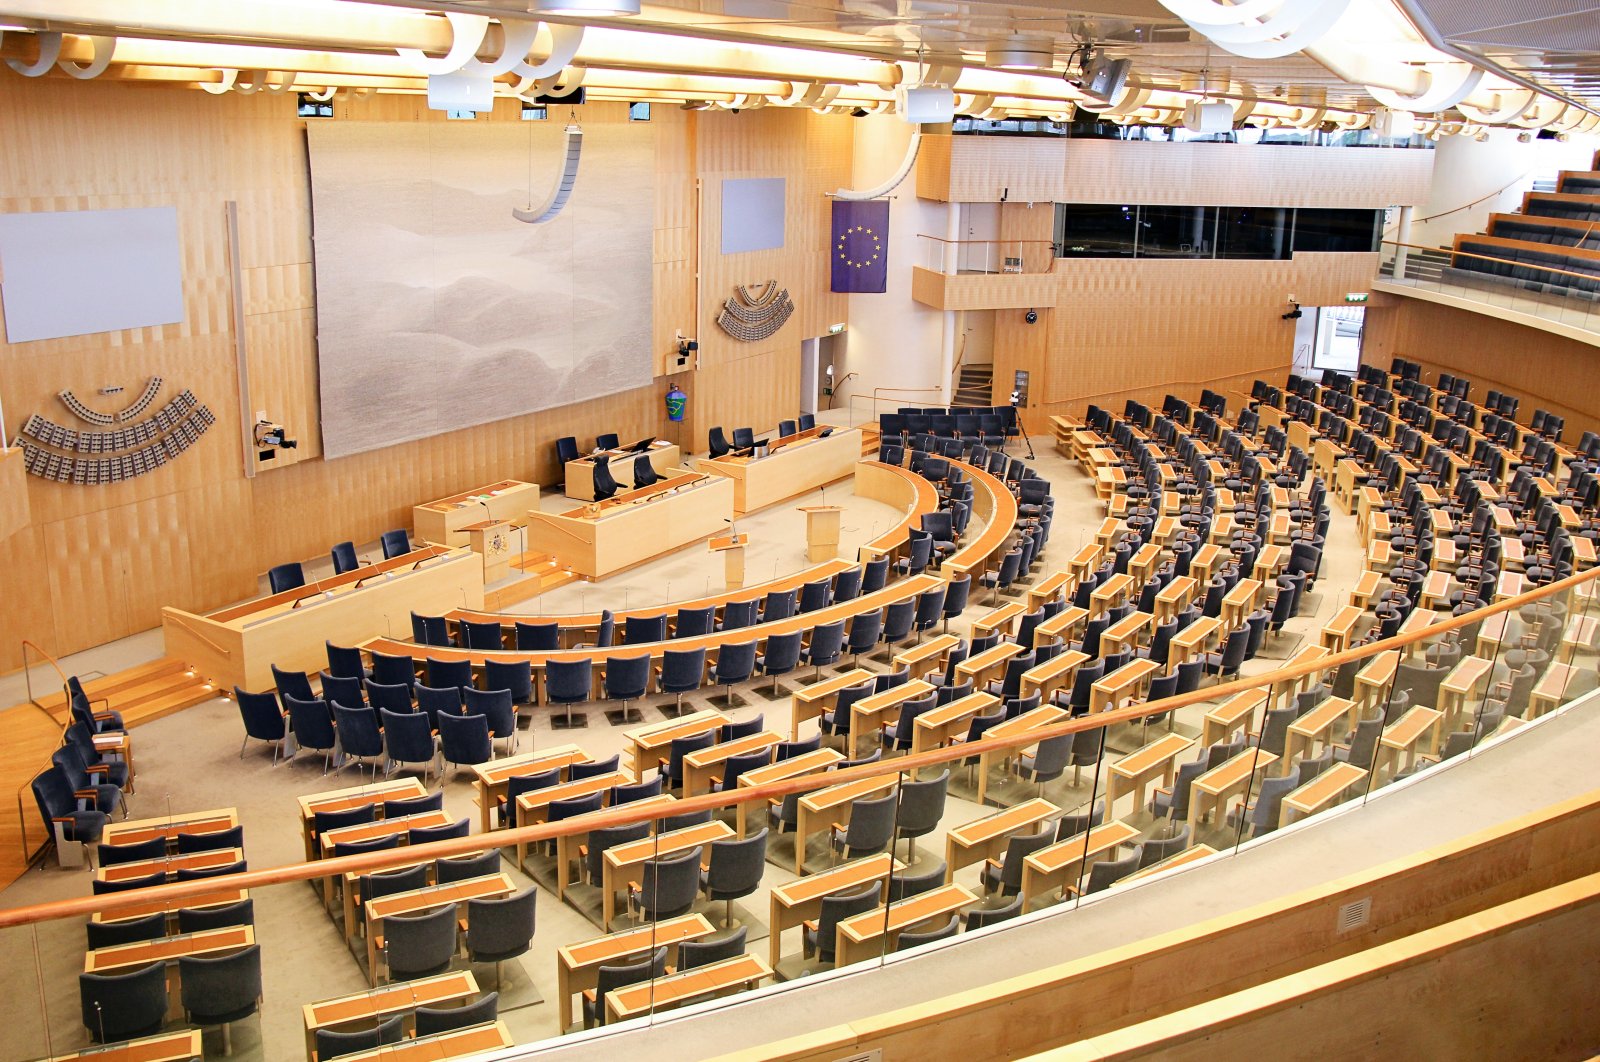 The Swedish Parliament is seen in this undated file photo. (Shutterstock File Photo)